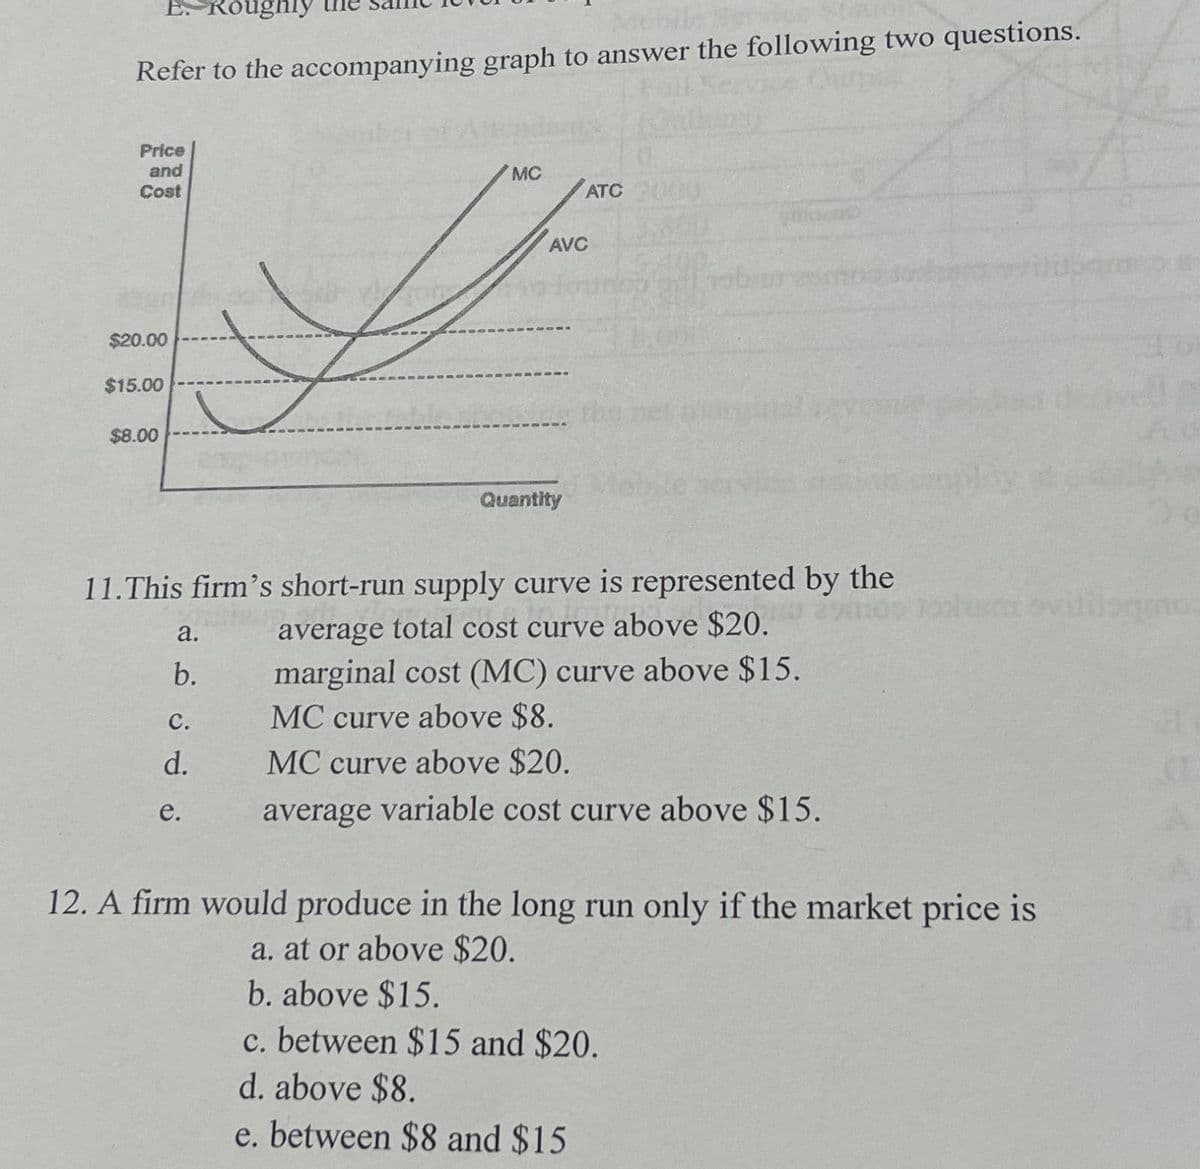 E. Roughly
Me
Refer to the accompanying graph to answer the following two questions.
Price
and
Cost
$20.00
$15.00
$8.00
MC
ATC
AVC
Quantity
290 tohi oviliisqno
a.
b.
11.This firm's short-run supply curve is represented by the
average total cost curve above $20.
marginal cost (MC) curve above $15.
C.
MC curve above $8.
d.
MC curve above $20.
e.
average variable cost curve above $15.
12. A firm would produce in the long run only if the market price is
a. at or above $20.
b. above $15.
c. between $15 and $20.
d. above $8.
e. between $8 and $15